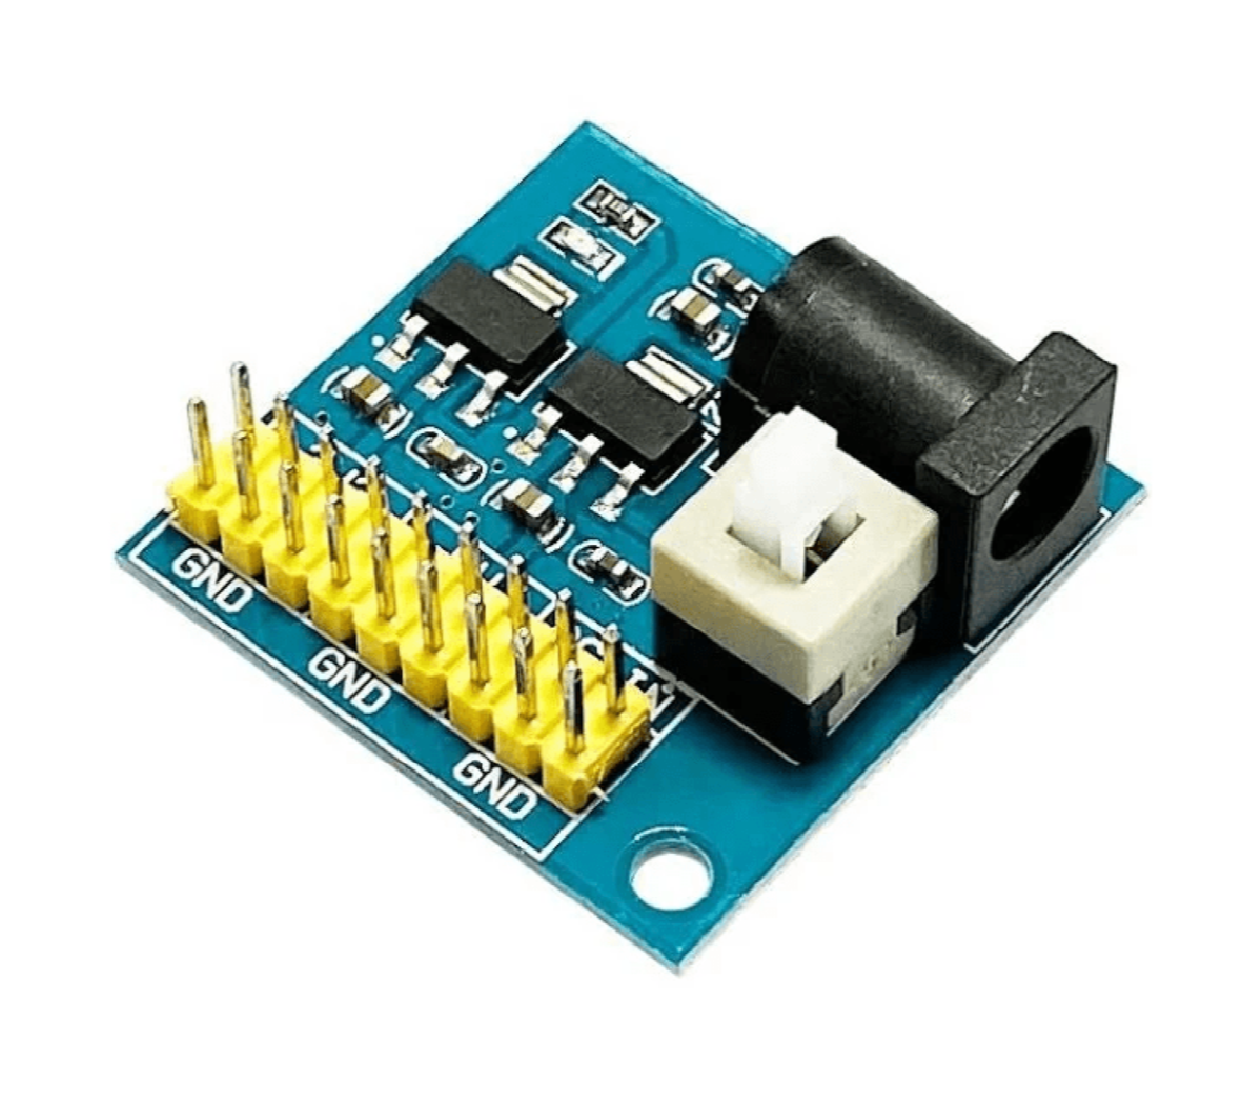  2 Pieces DC Converter 12V to 5V 3A 15W DC Buck Converter  Module, DC to DC Reduced Voltage Regulator Car Power Converter Output Power  Adapter (Double USB Interface) : Electronics